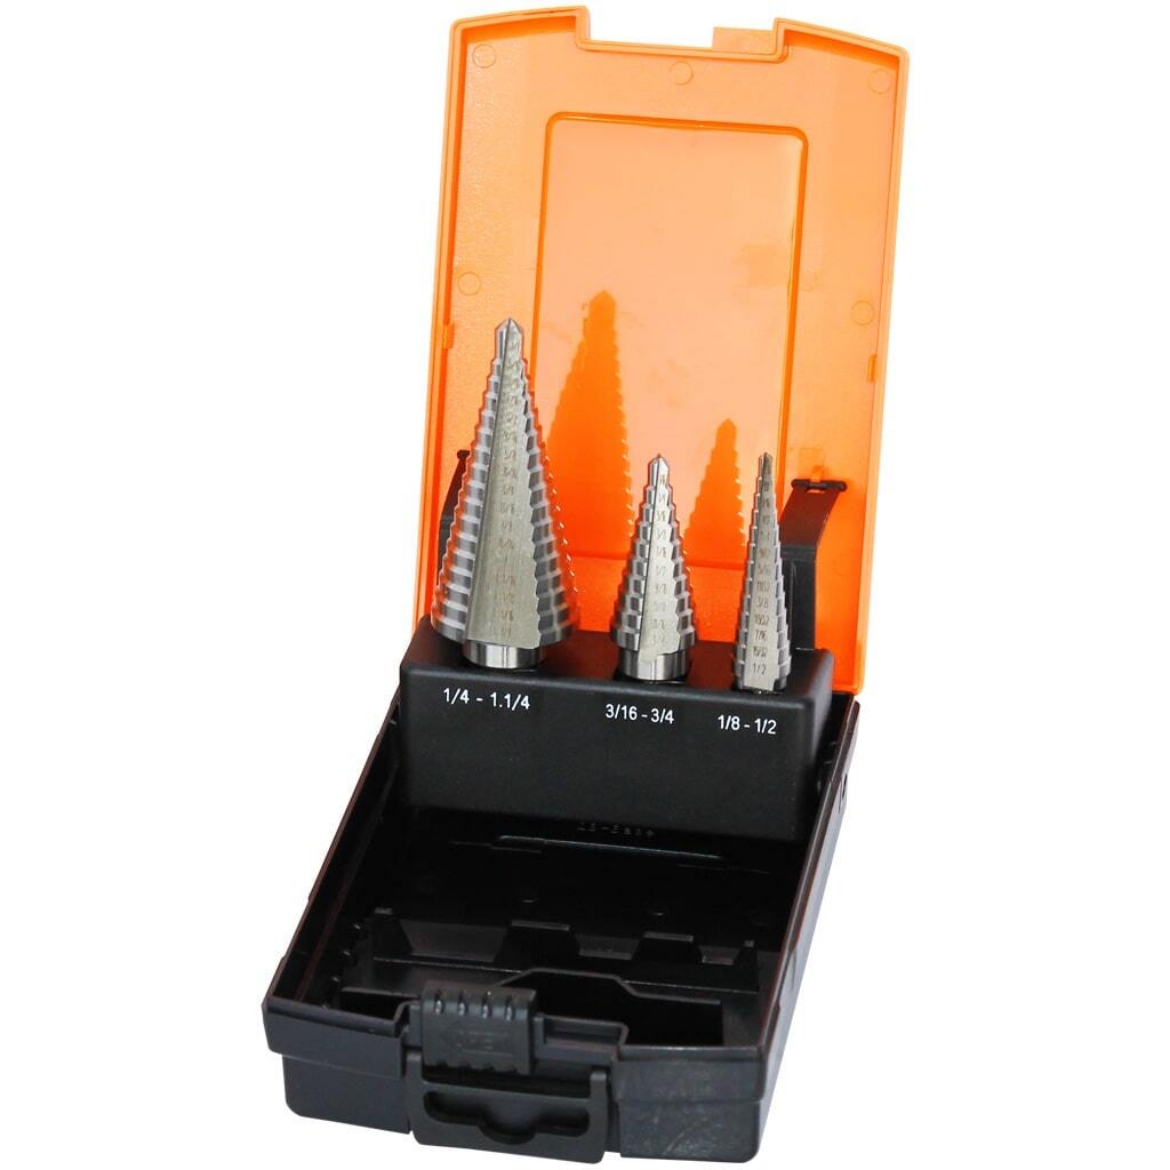 Picture of STEP DRILL SET 3PCE SAE  3/16"-3/4",  1/8"-1/2",  1/4"-1-1/4"